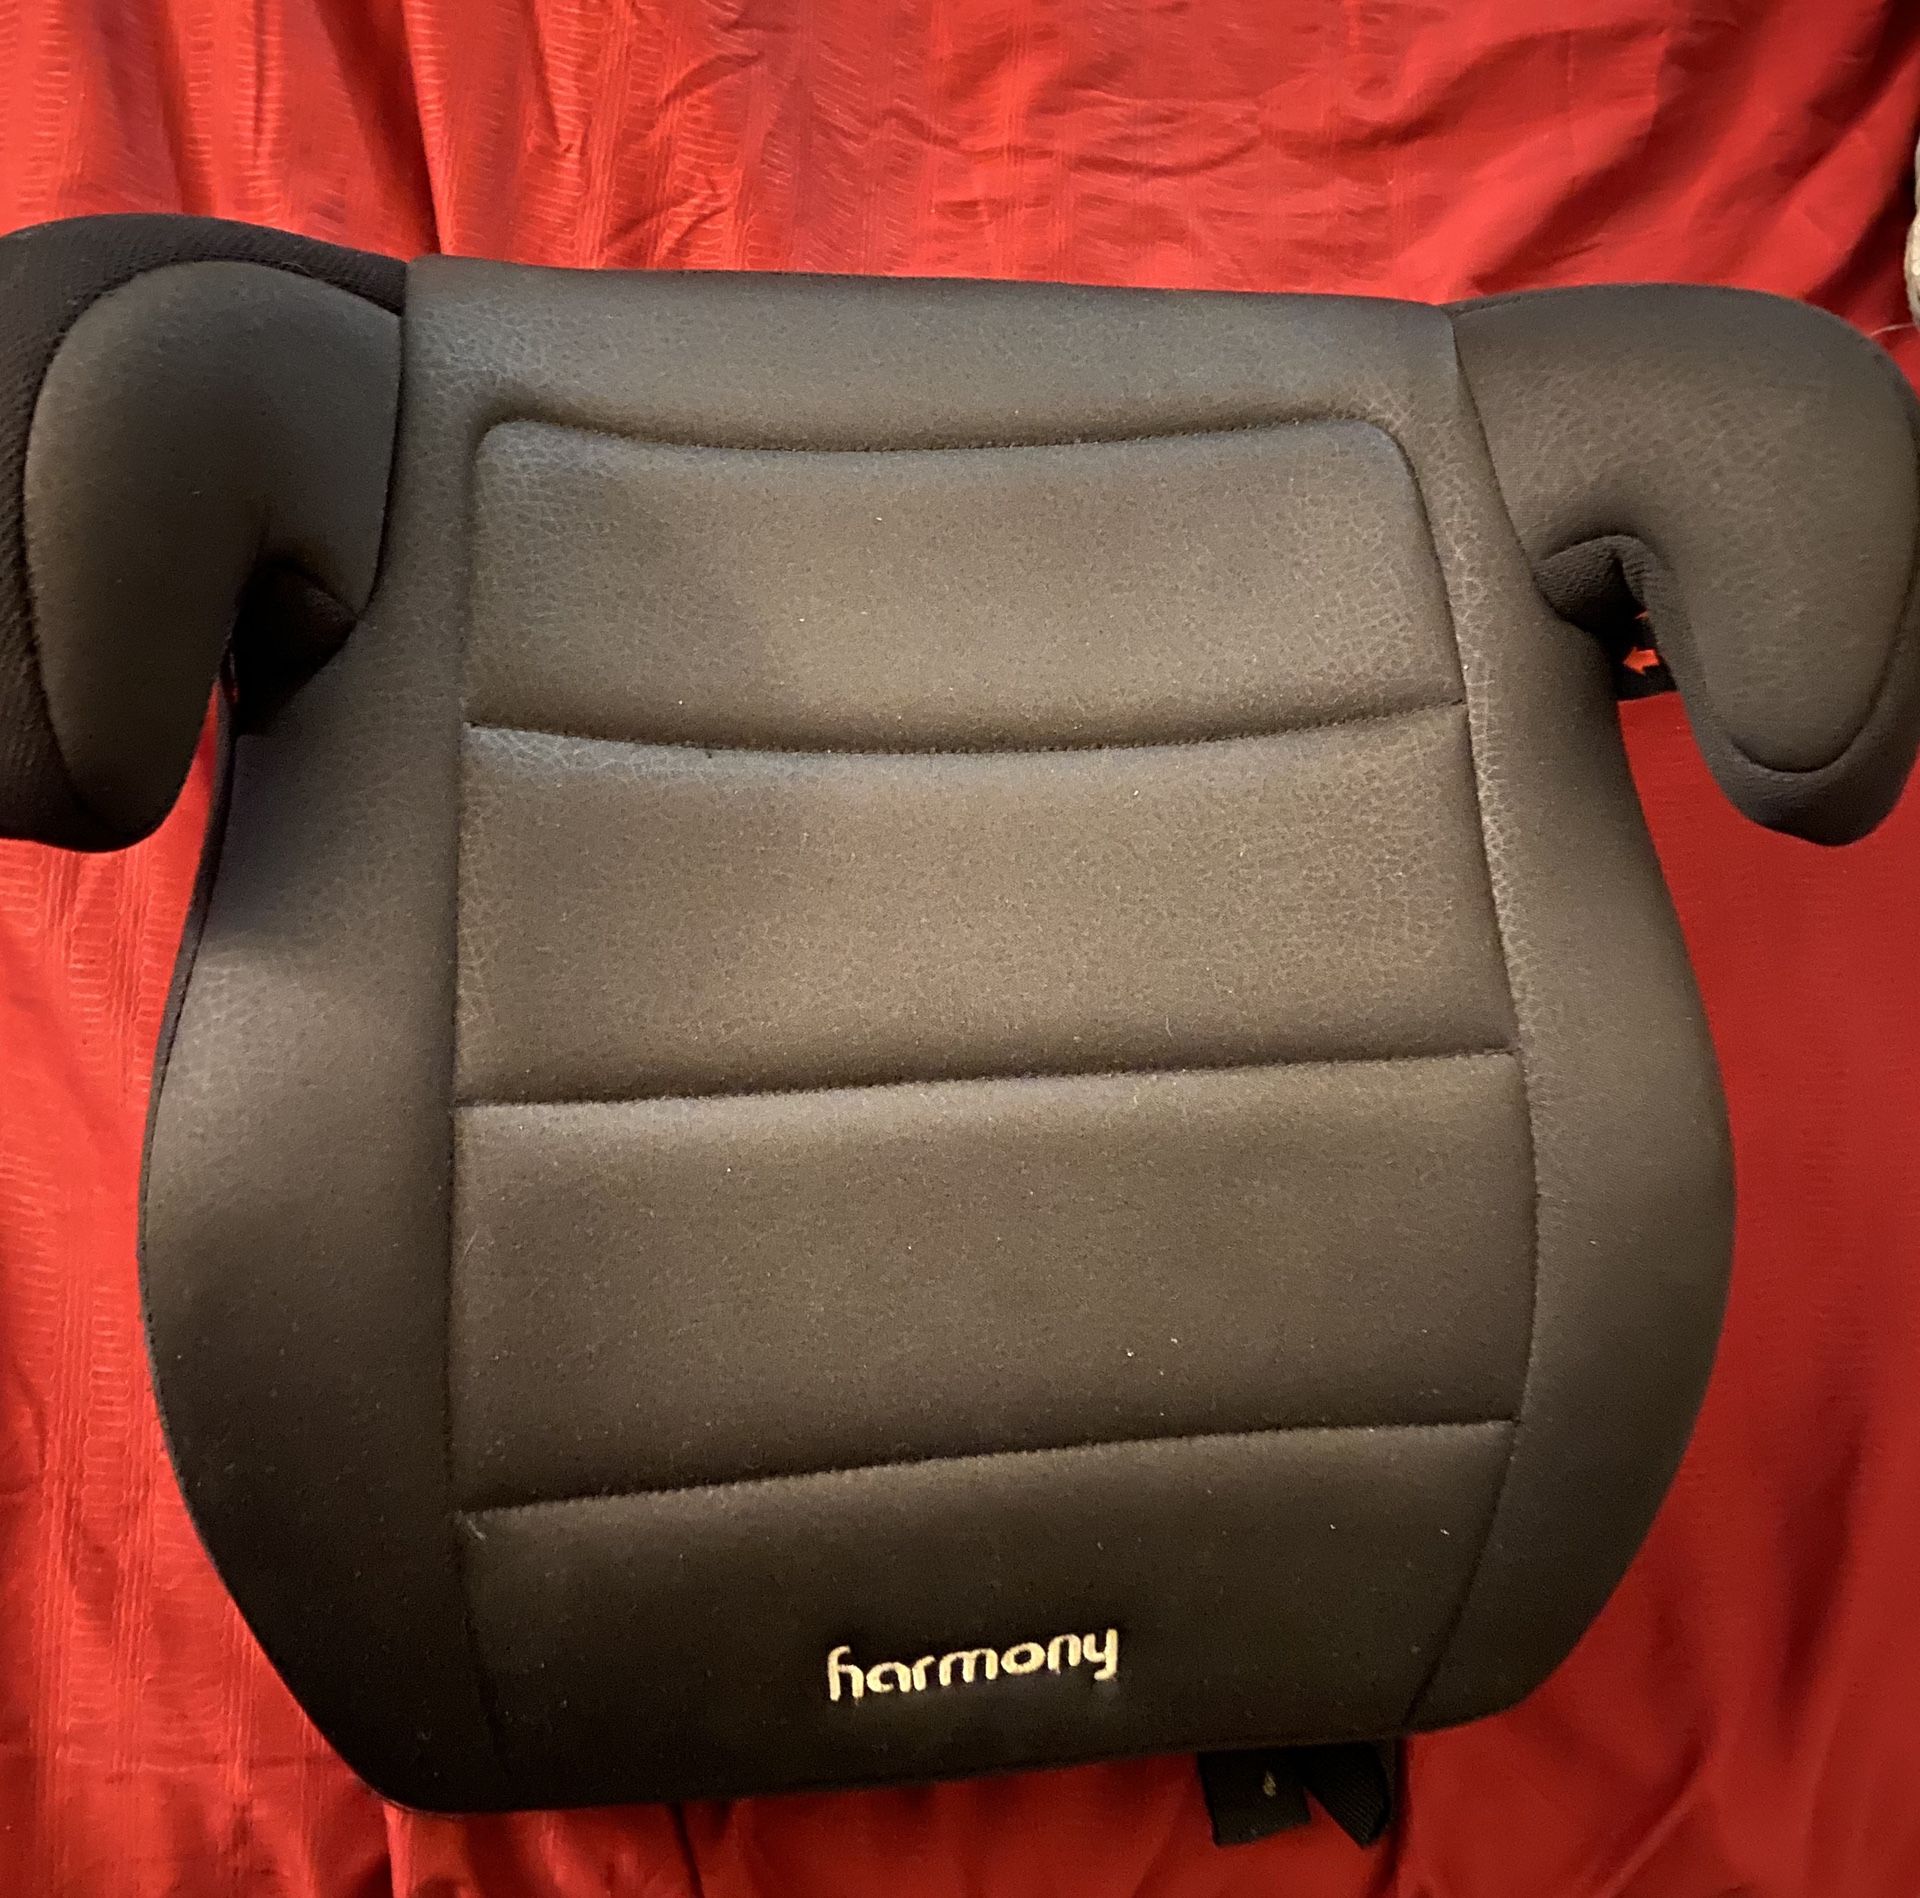 Harmony booster seat